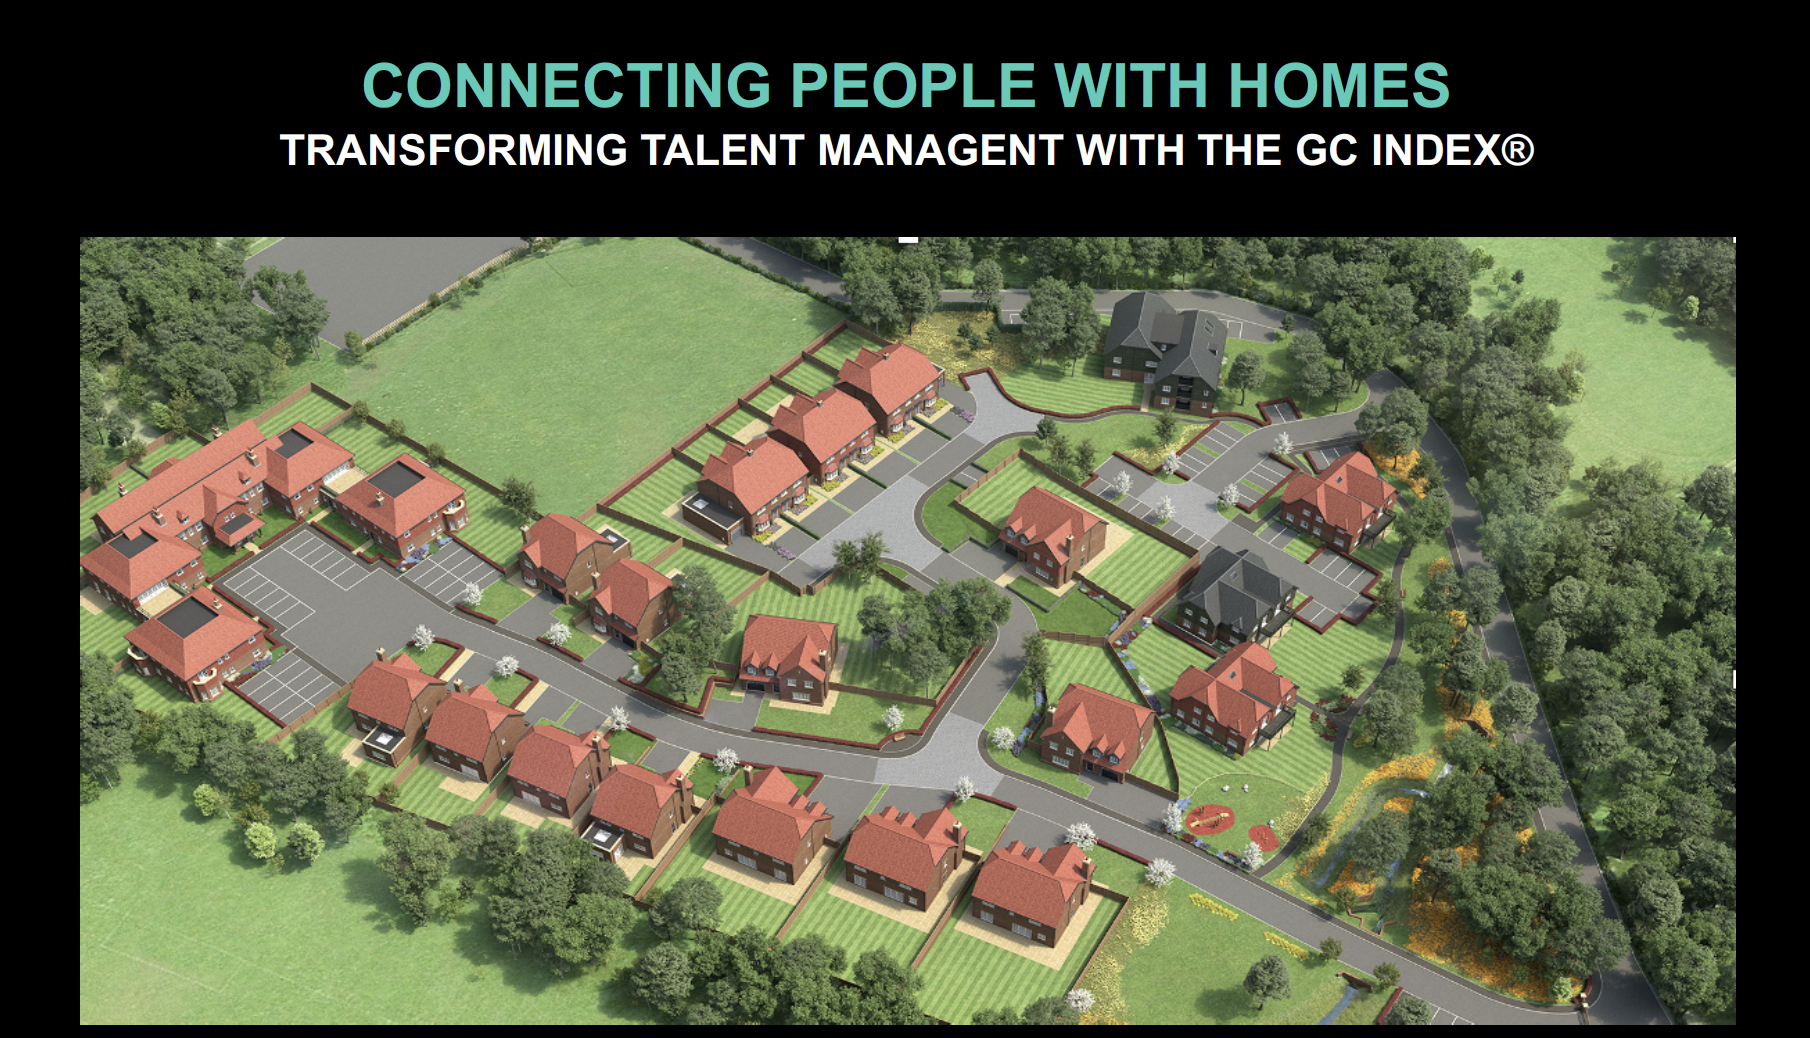 Connecting People With Homes: Transforming Talent Management at Imagine